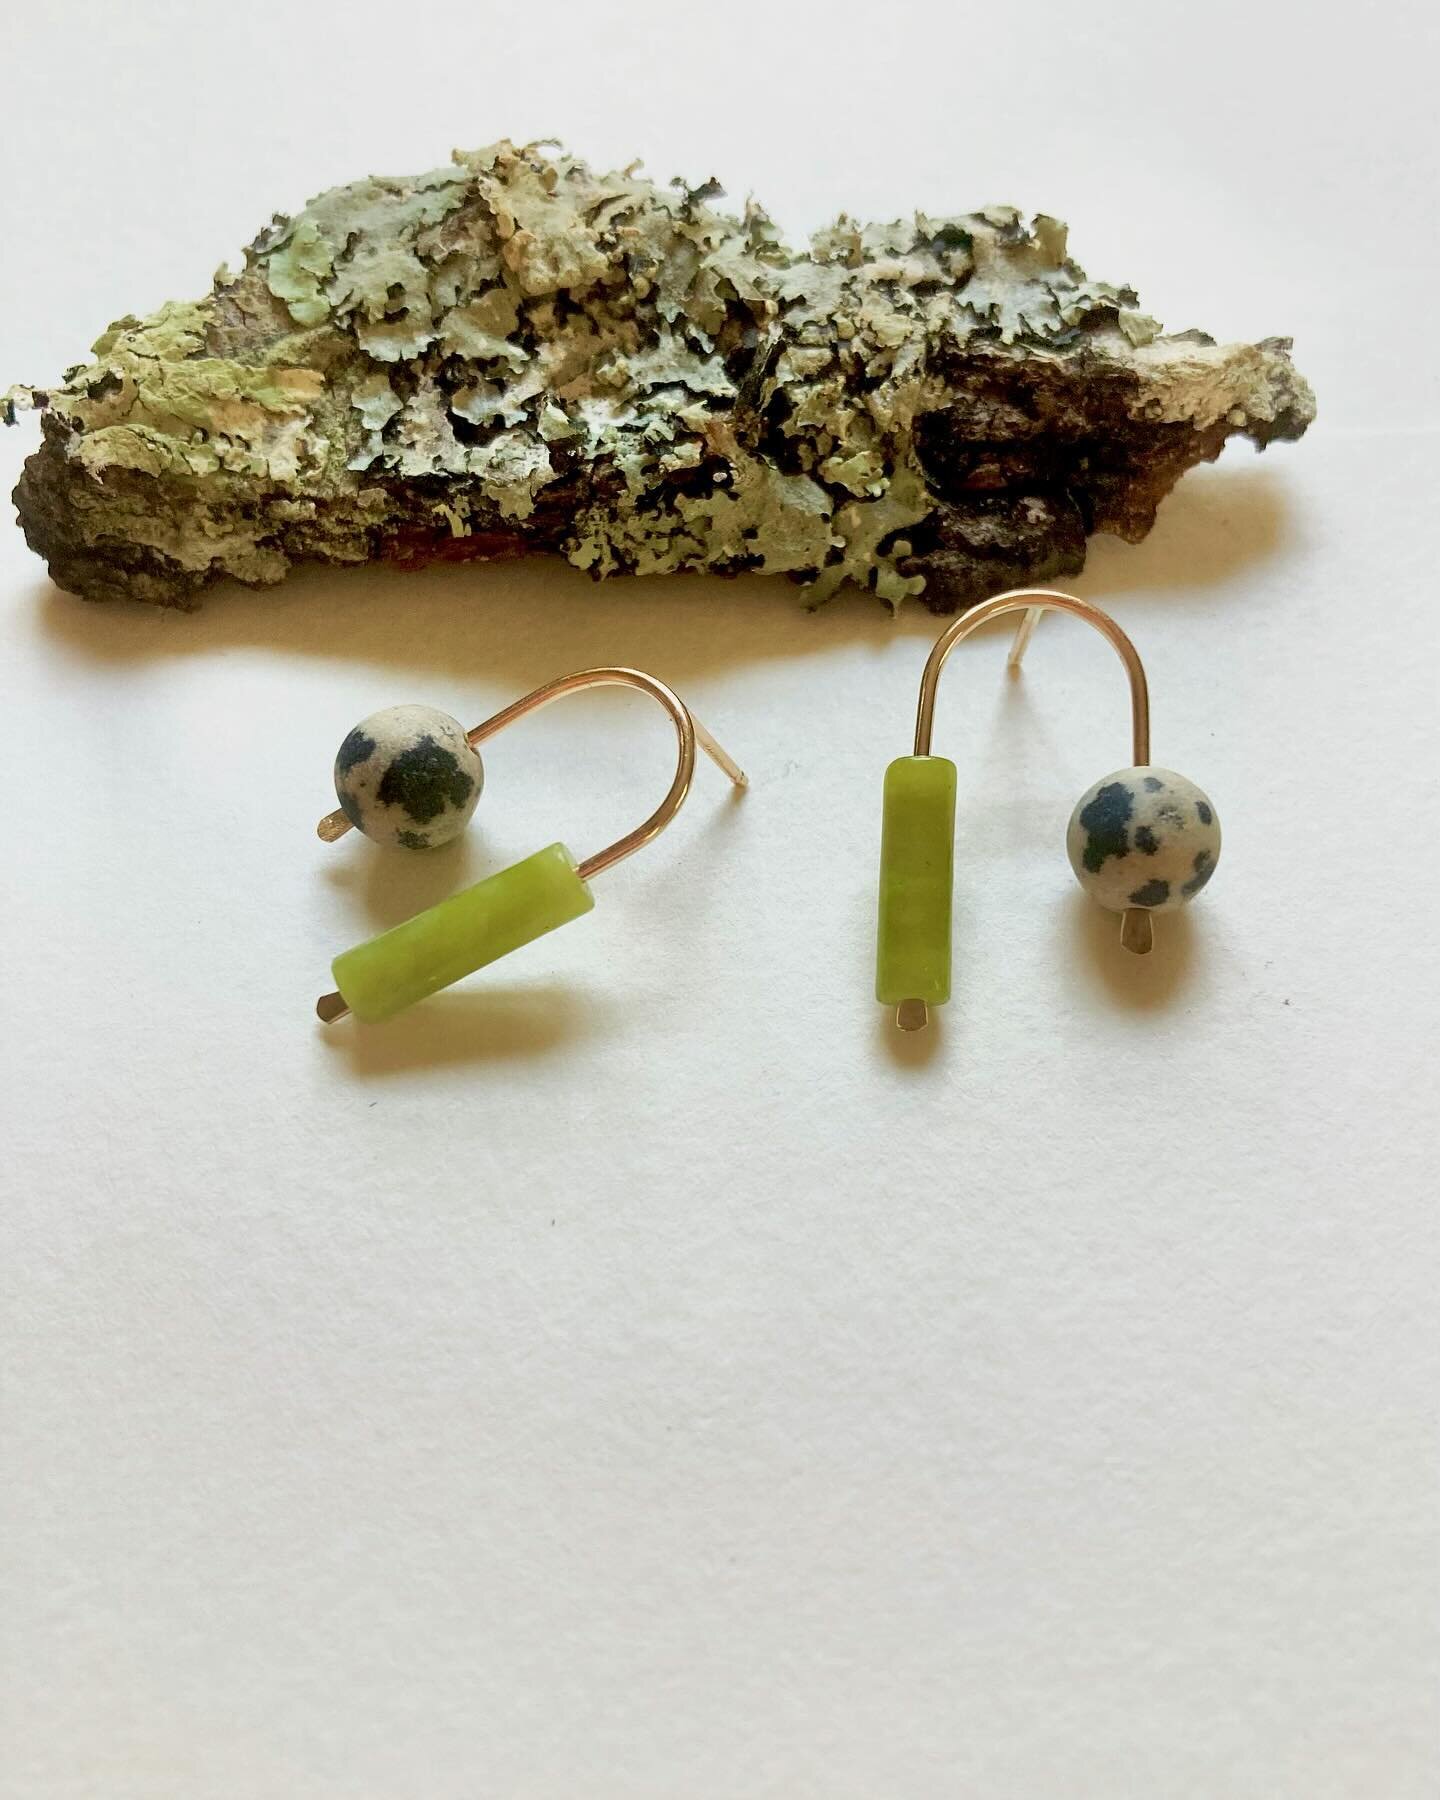 The muse and the art. I found this lichen-covered bark on a recent hike, a beautiful specimen lying in the path. It inspired this new palette of Olive Jade and Dalmatian Jasper. Available online now!

#jewelry #handmade #828isgreat #nature #abstracta